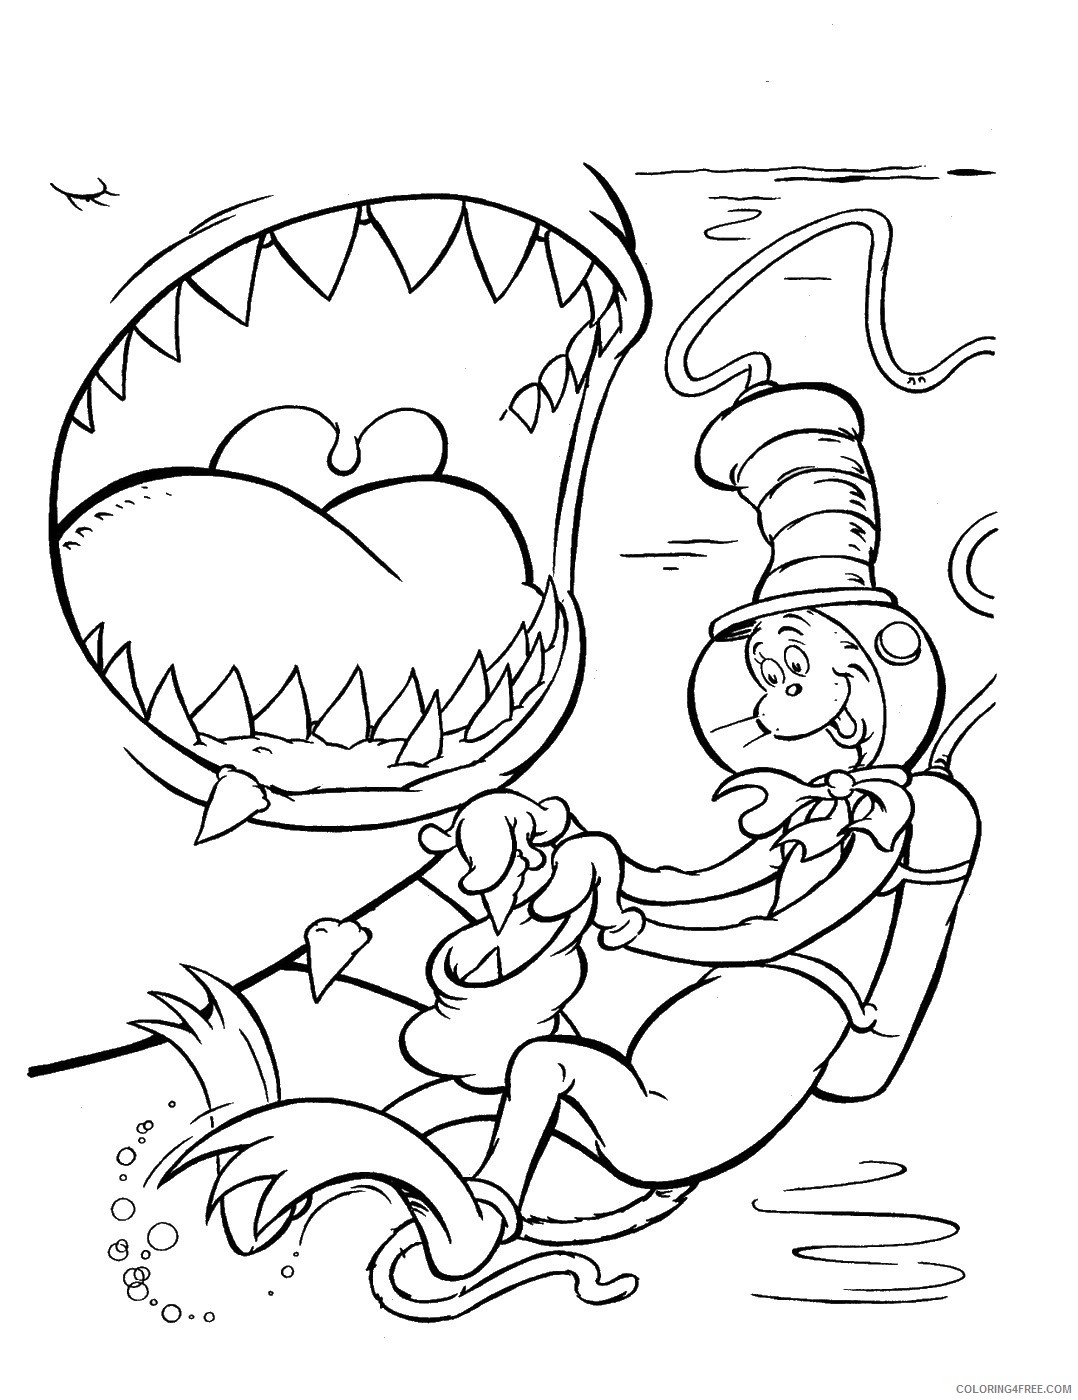 The Cat in the Hat Coloring Pages Cartoons cat_hat_cl_15 Printable 2020 6378 Coloring4free